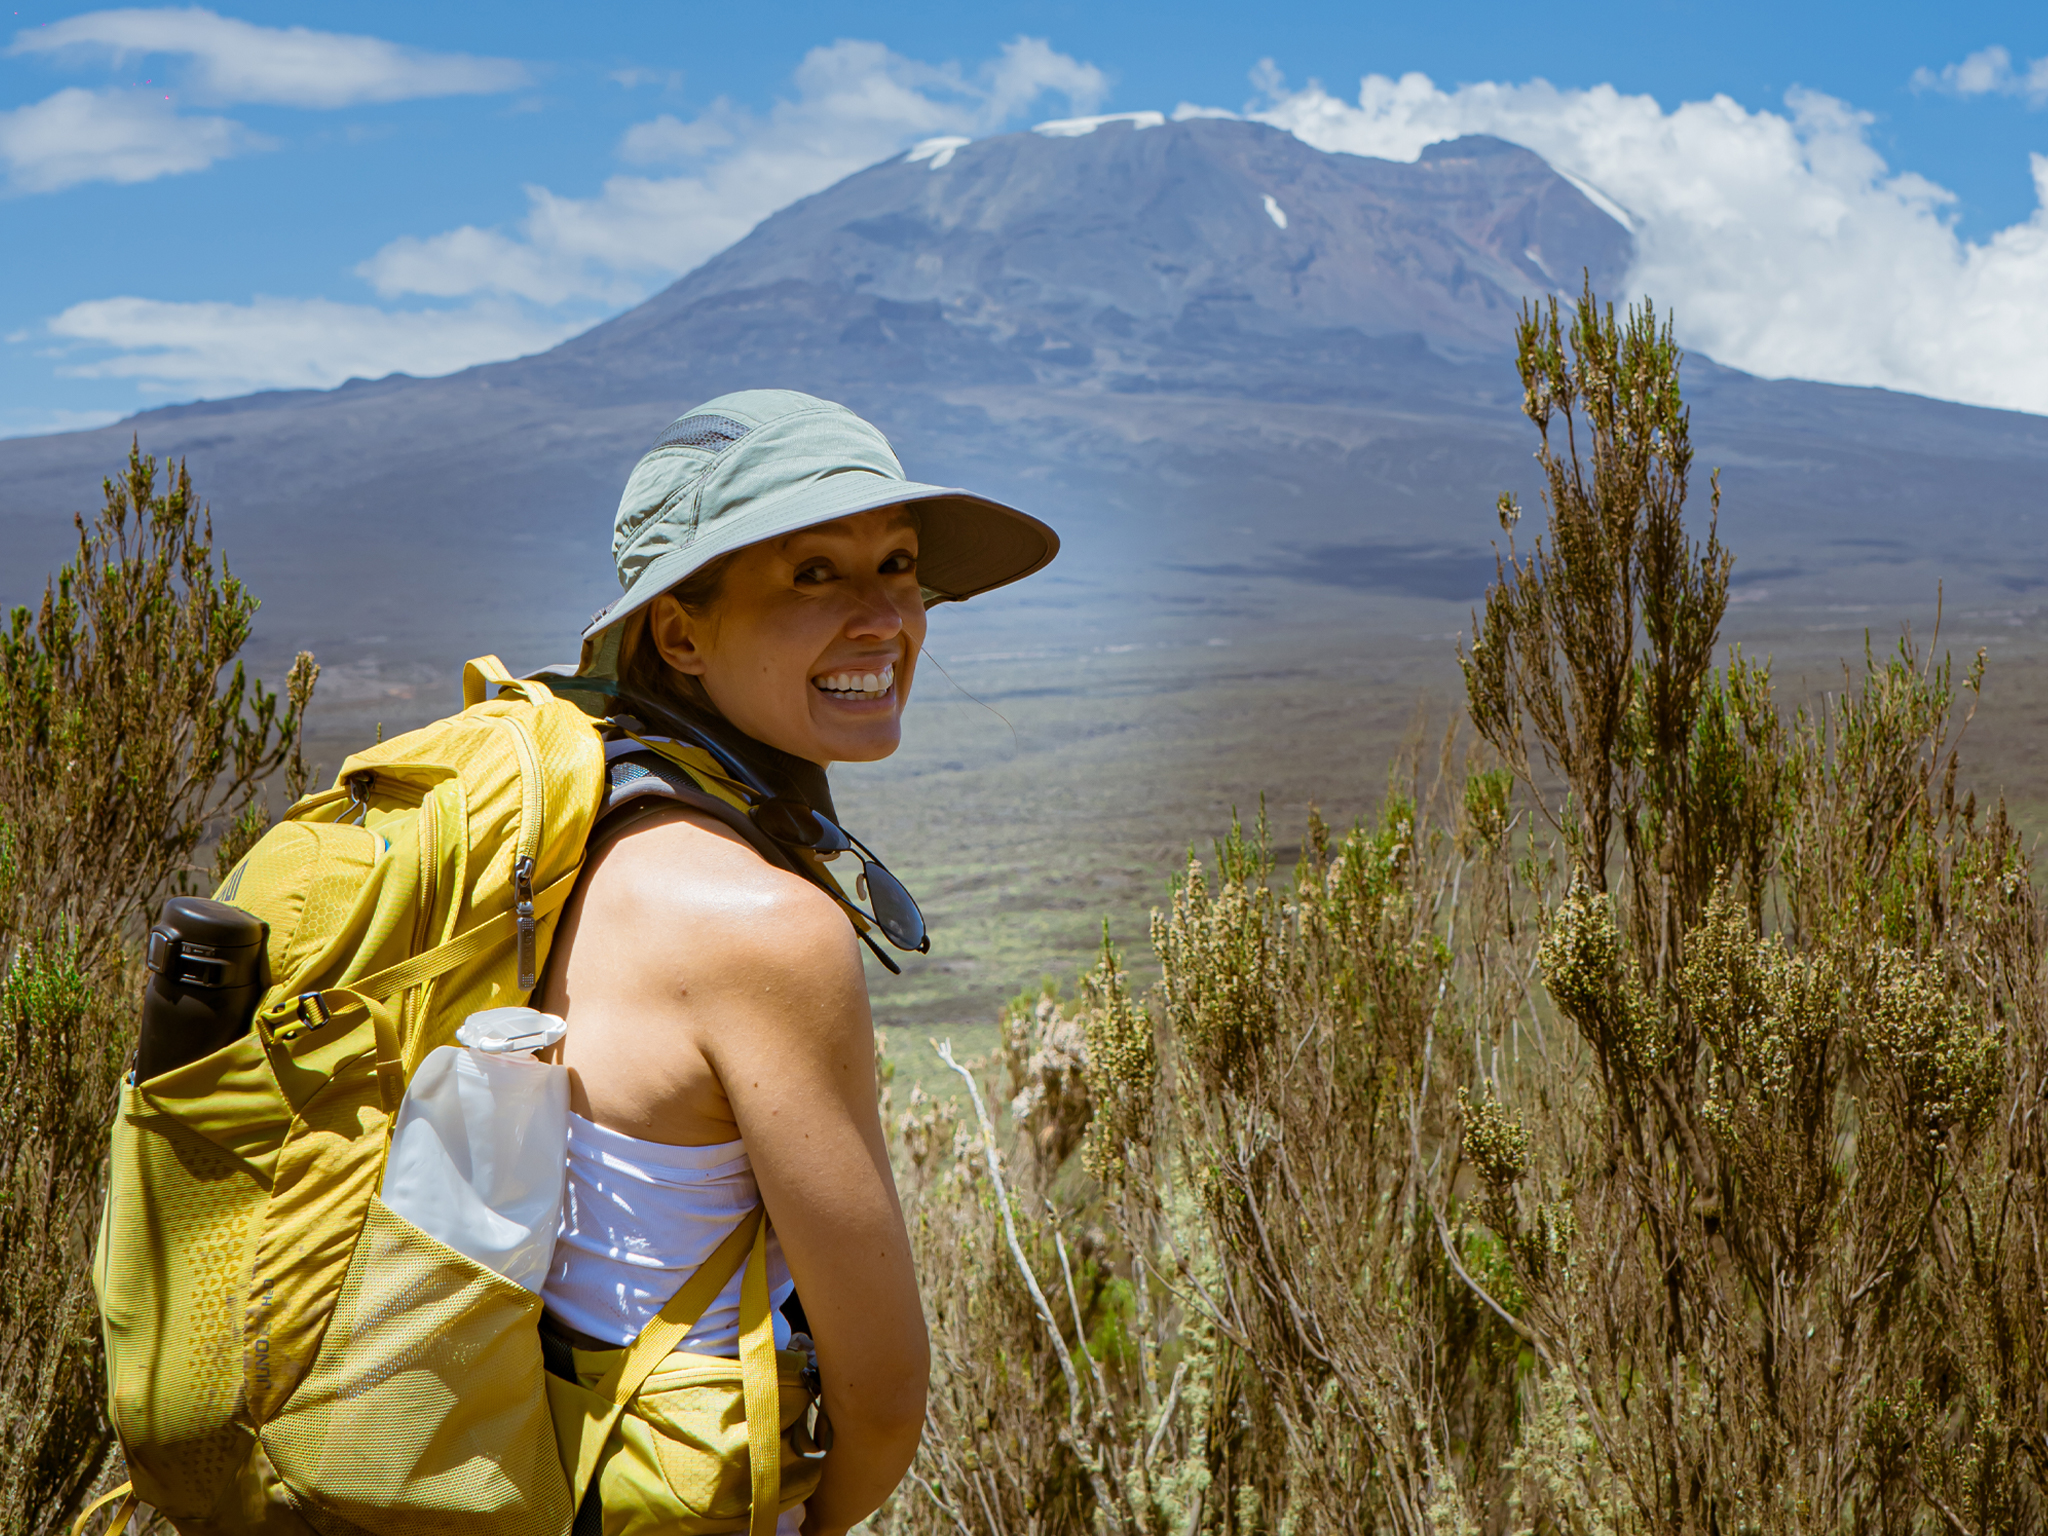 What are the essentials required for Mt. Kilimanjaro climb?